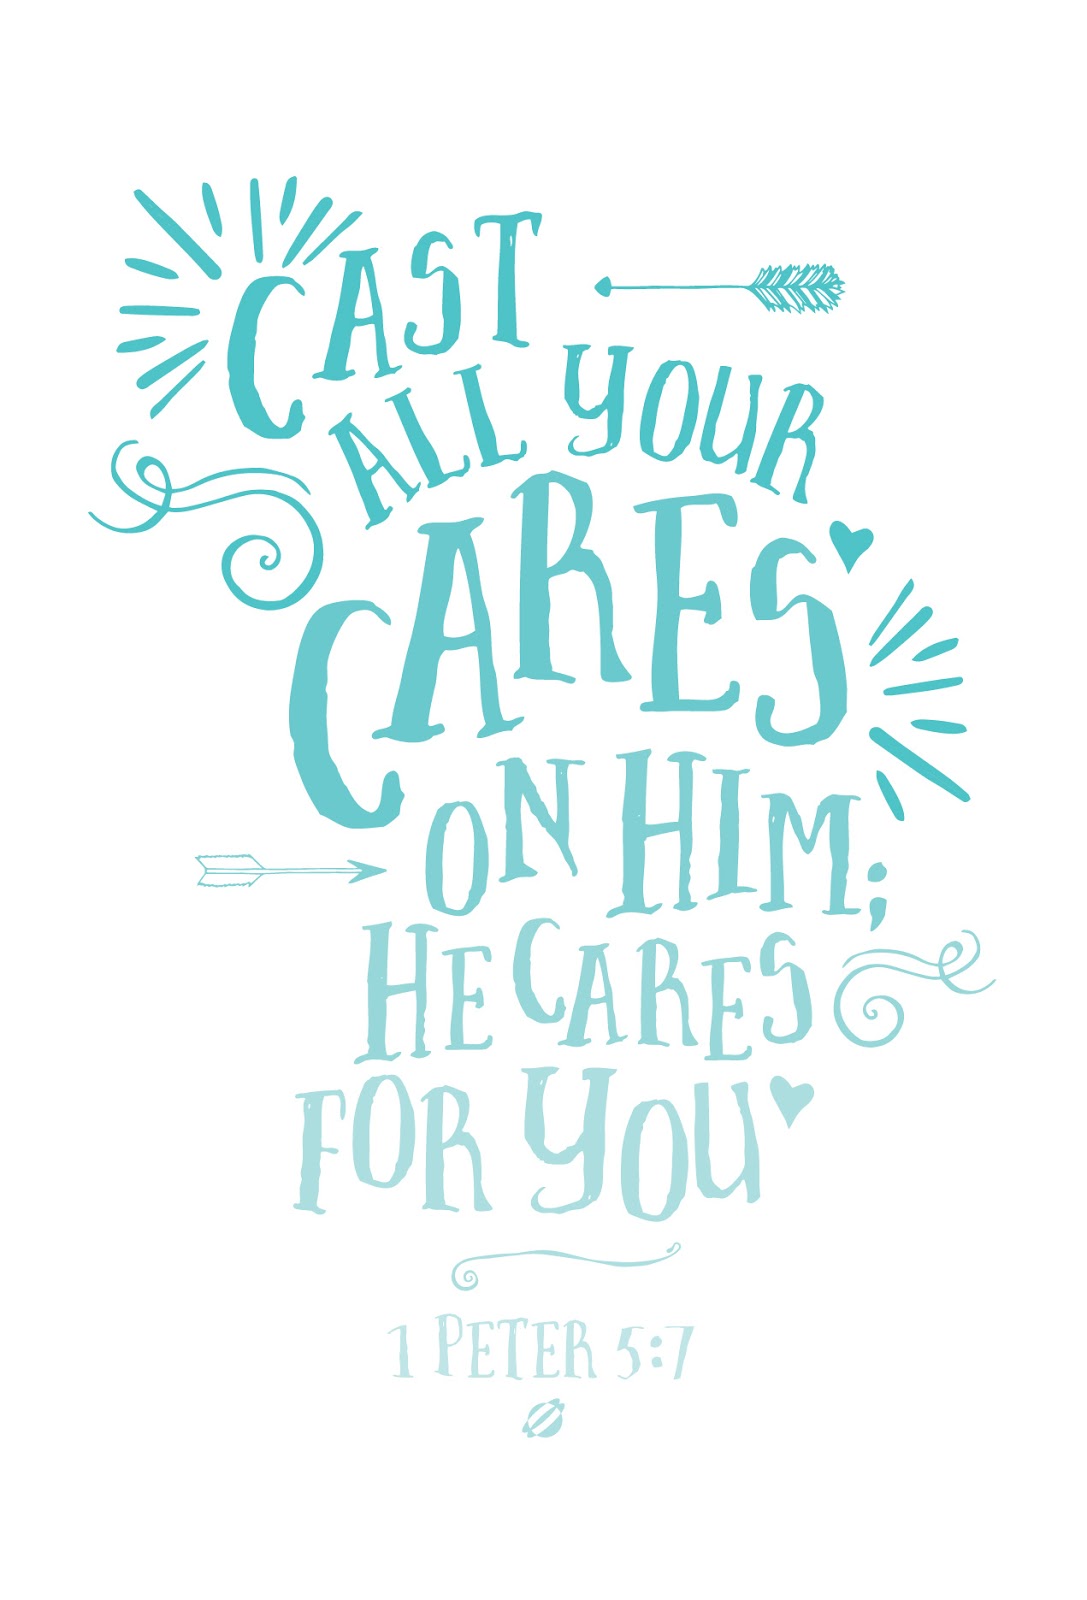 LostBumblebee ©2014 Cast Your Cares 1 Peter 5:7 FREE PRINTABLE- personal use only